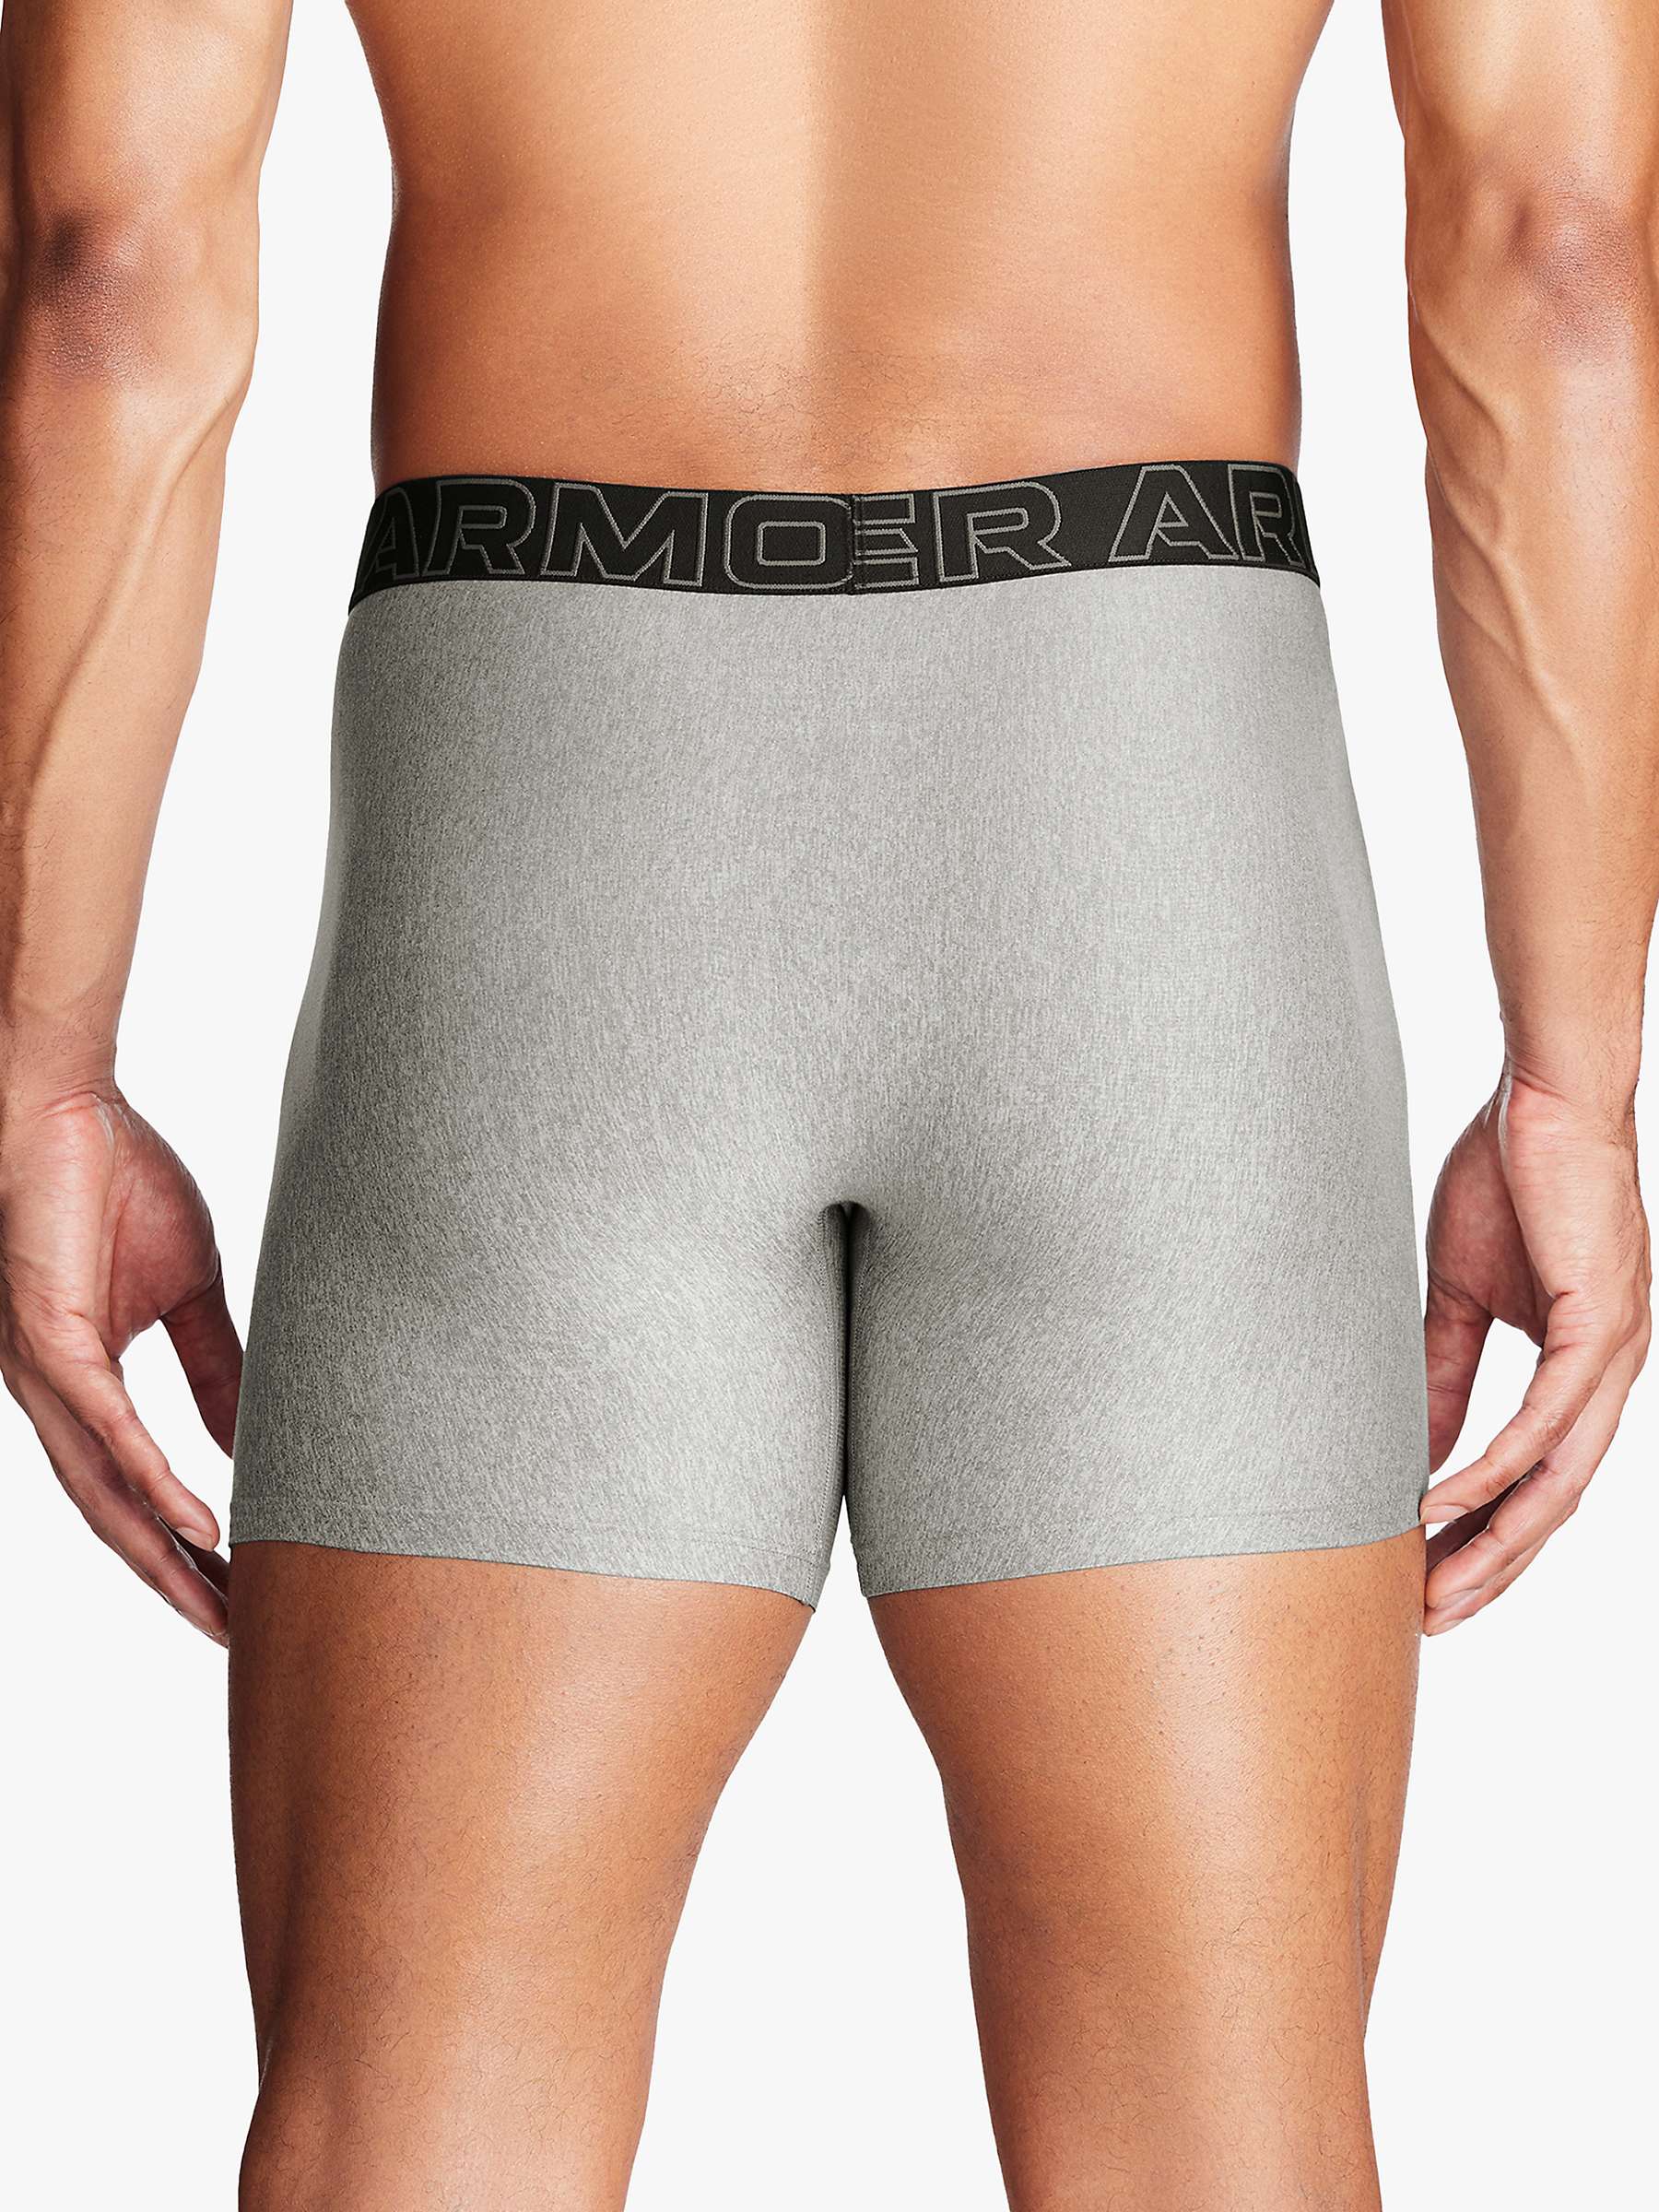 Buy Under Armour Tech 6" Boxers, Pack of 3 Online at johnlewis.com